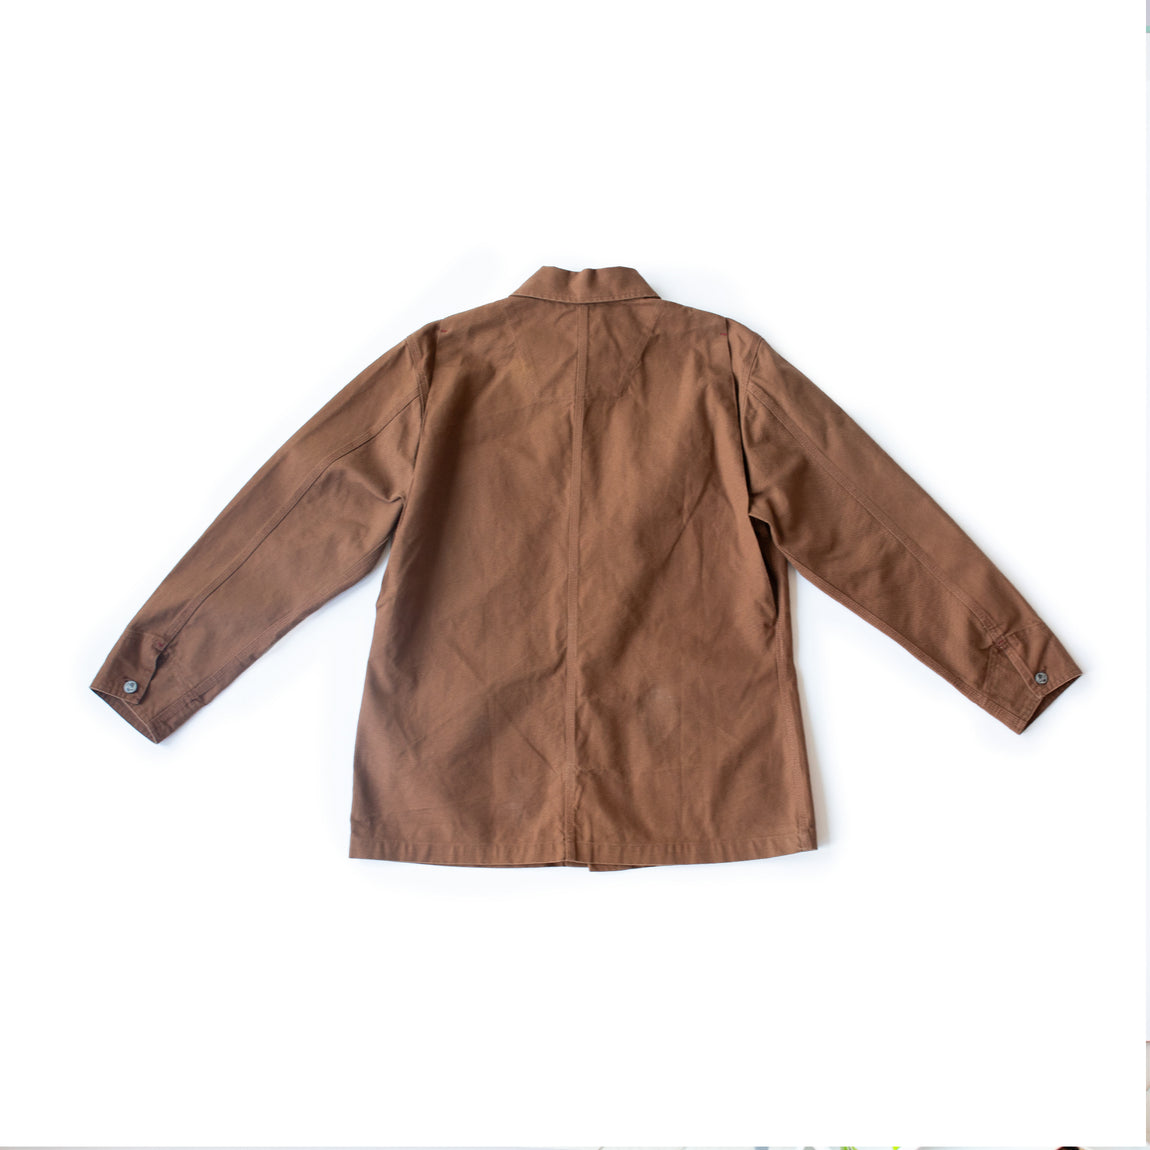 Dickies 1922 Chore Jacket (Timber Brown Duck Canvas) - Dickies 1922 Chore Jacket (Timber Brown Duck Canvas) - 